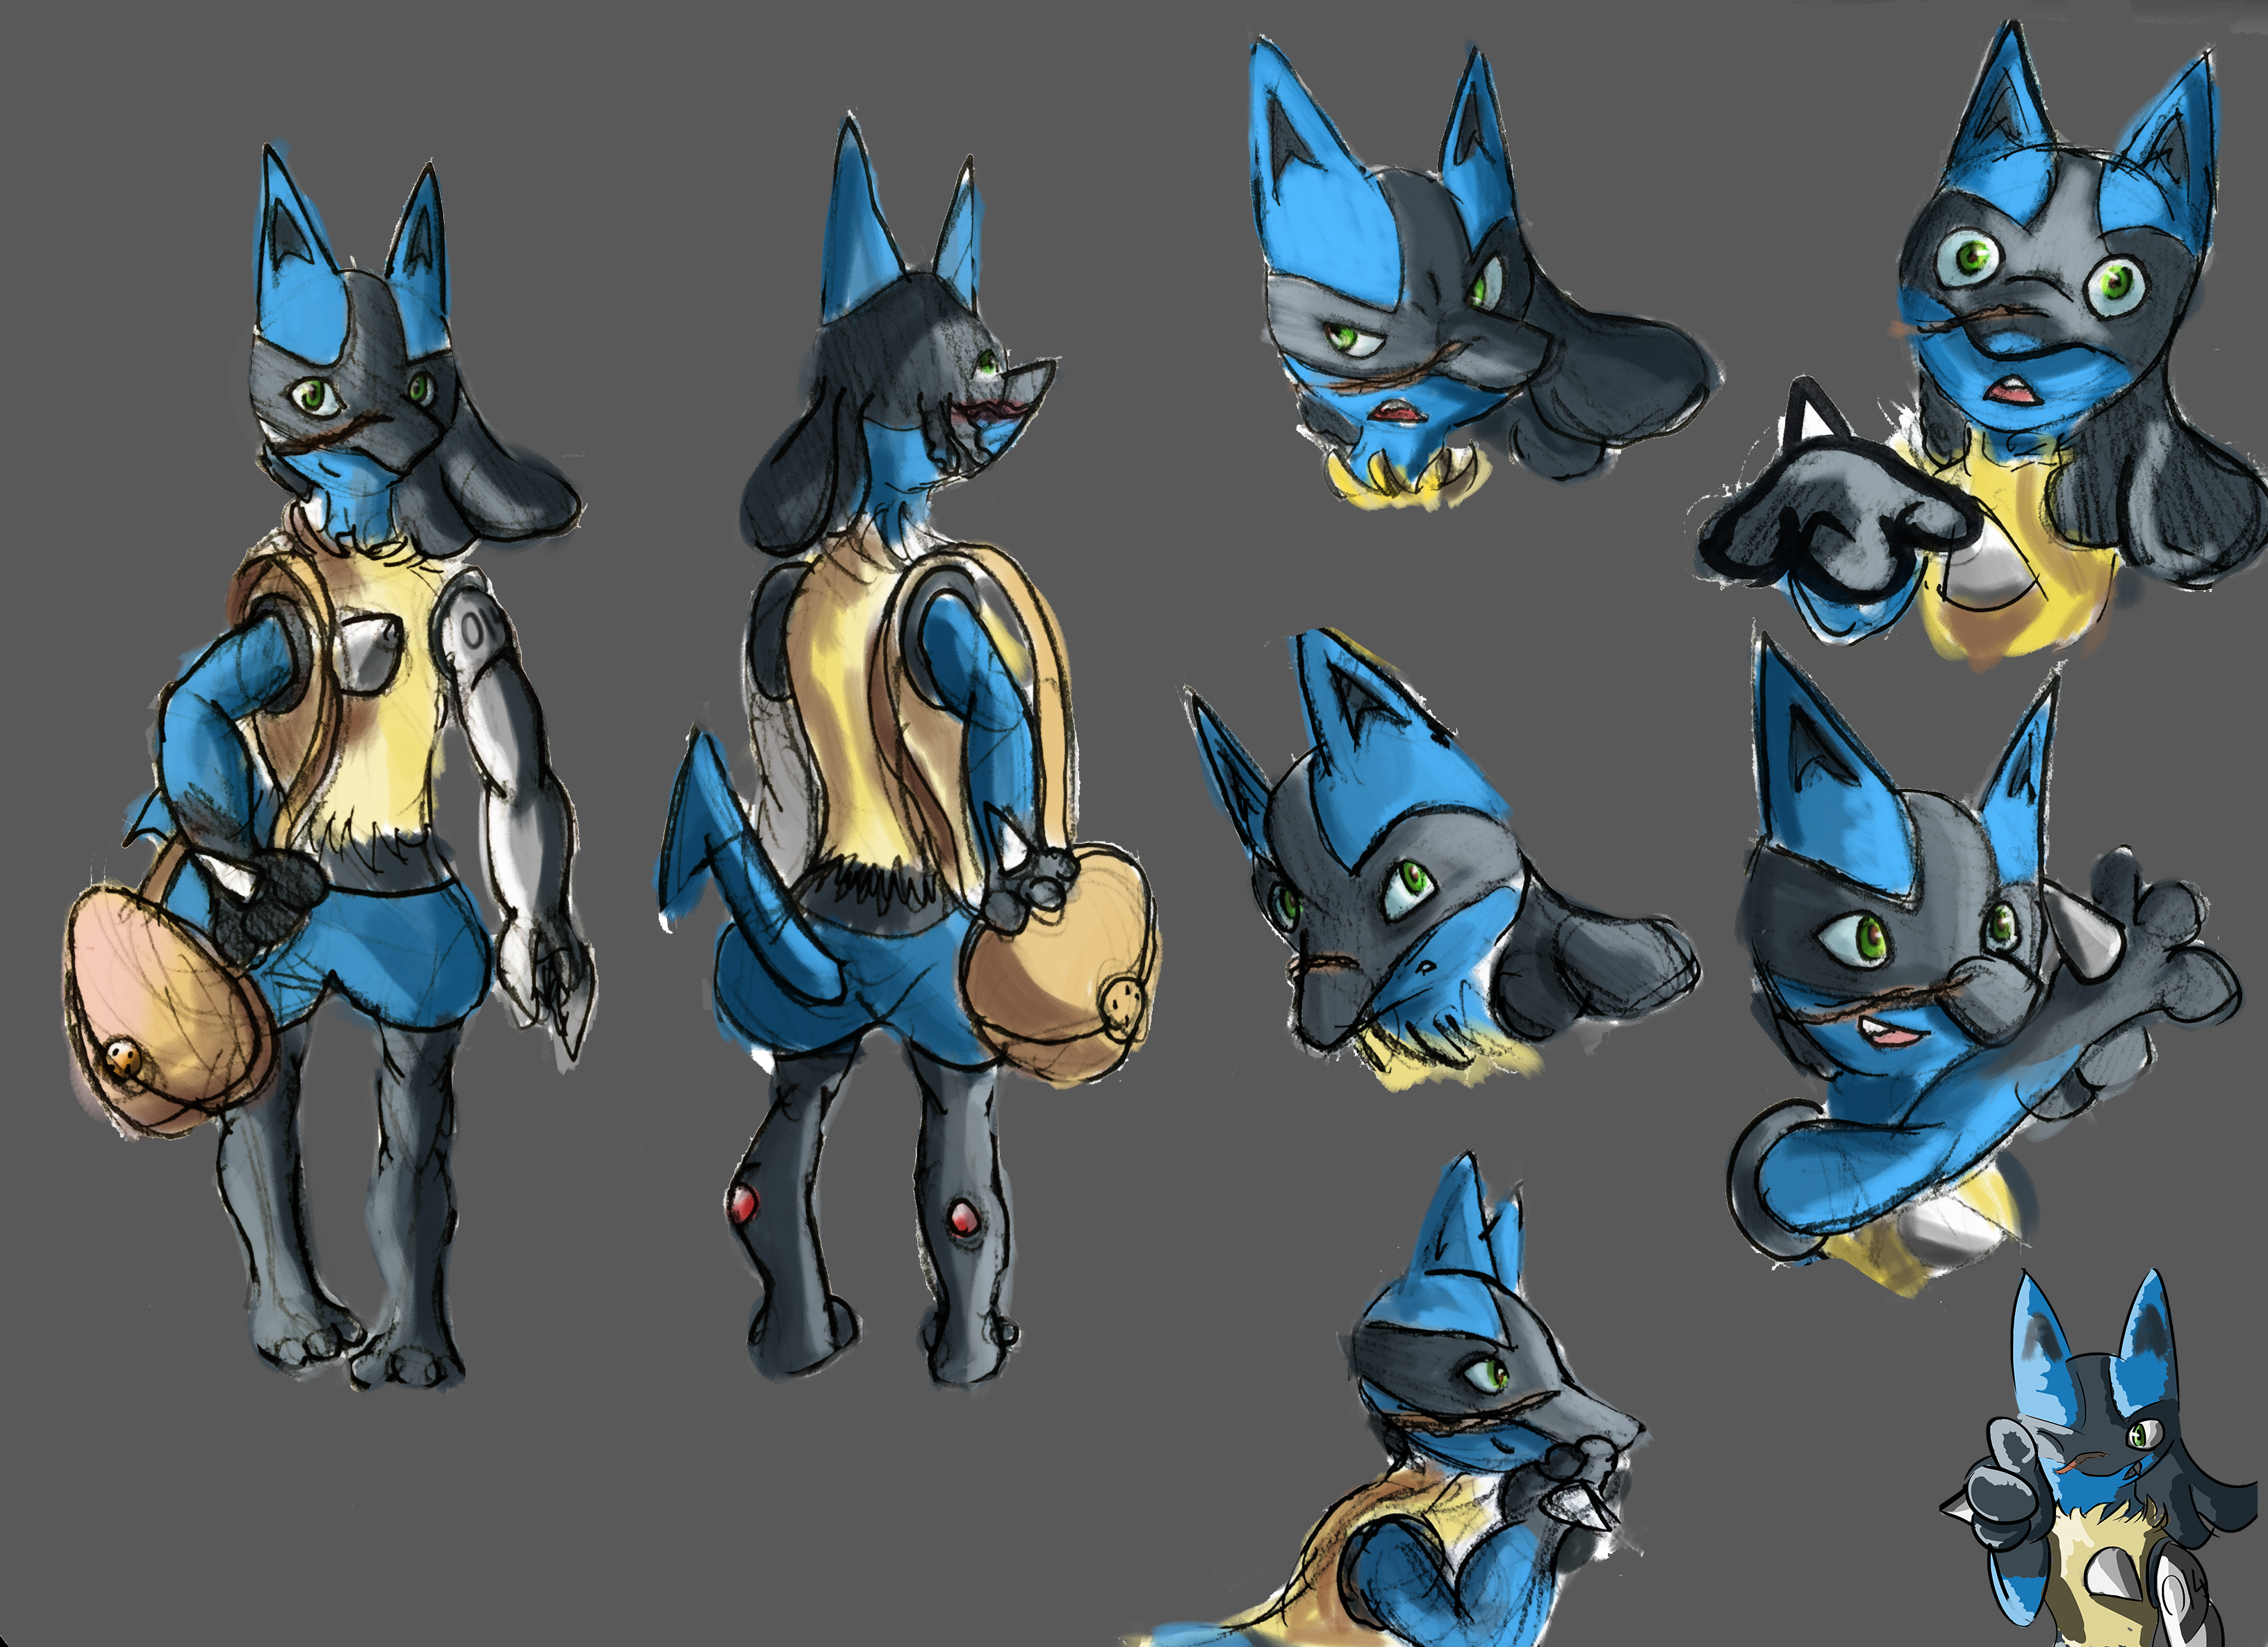 curio__lucario__reference_sheet_by_starlightcrux-dc0l31q.png